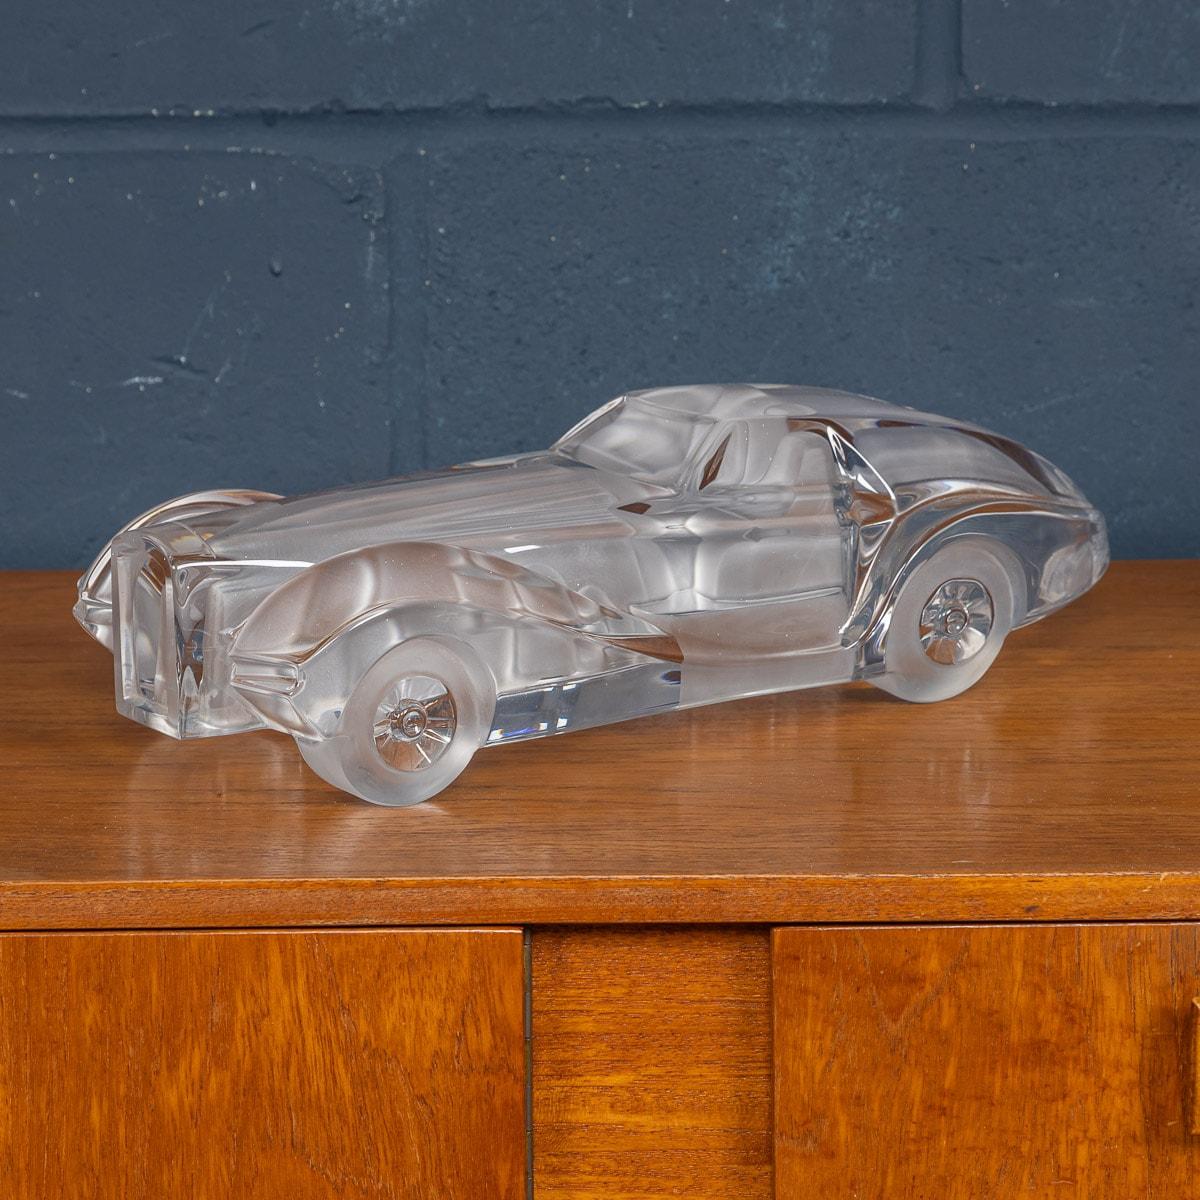 A rare model race car designed by Xavier Froissart and realised by Daum, France, circa 1985. A mixture of frosted and polished glass give a wonderful texture to this sculpture, recalling the lines of a Le Mans single seater race-car from the 1940s.